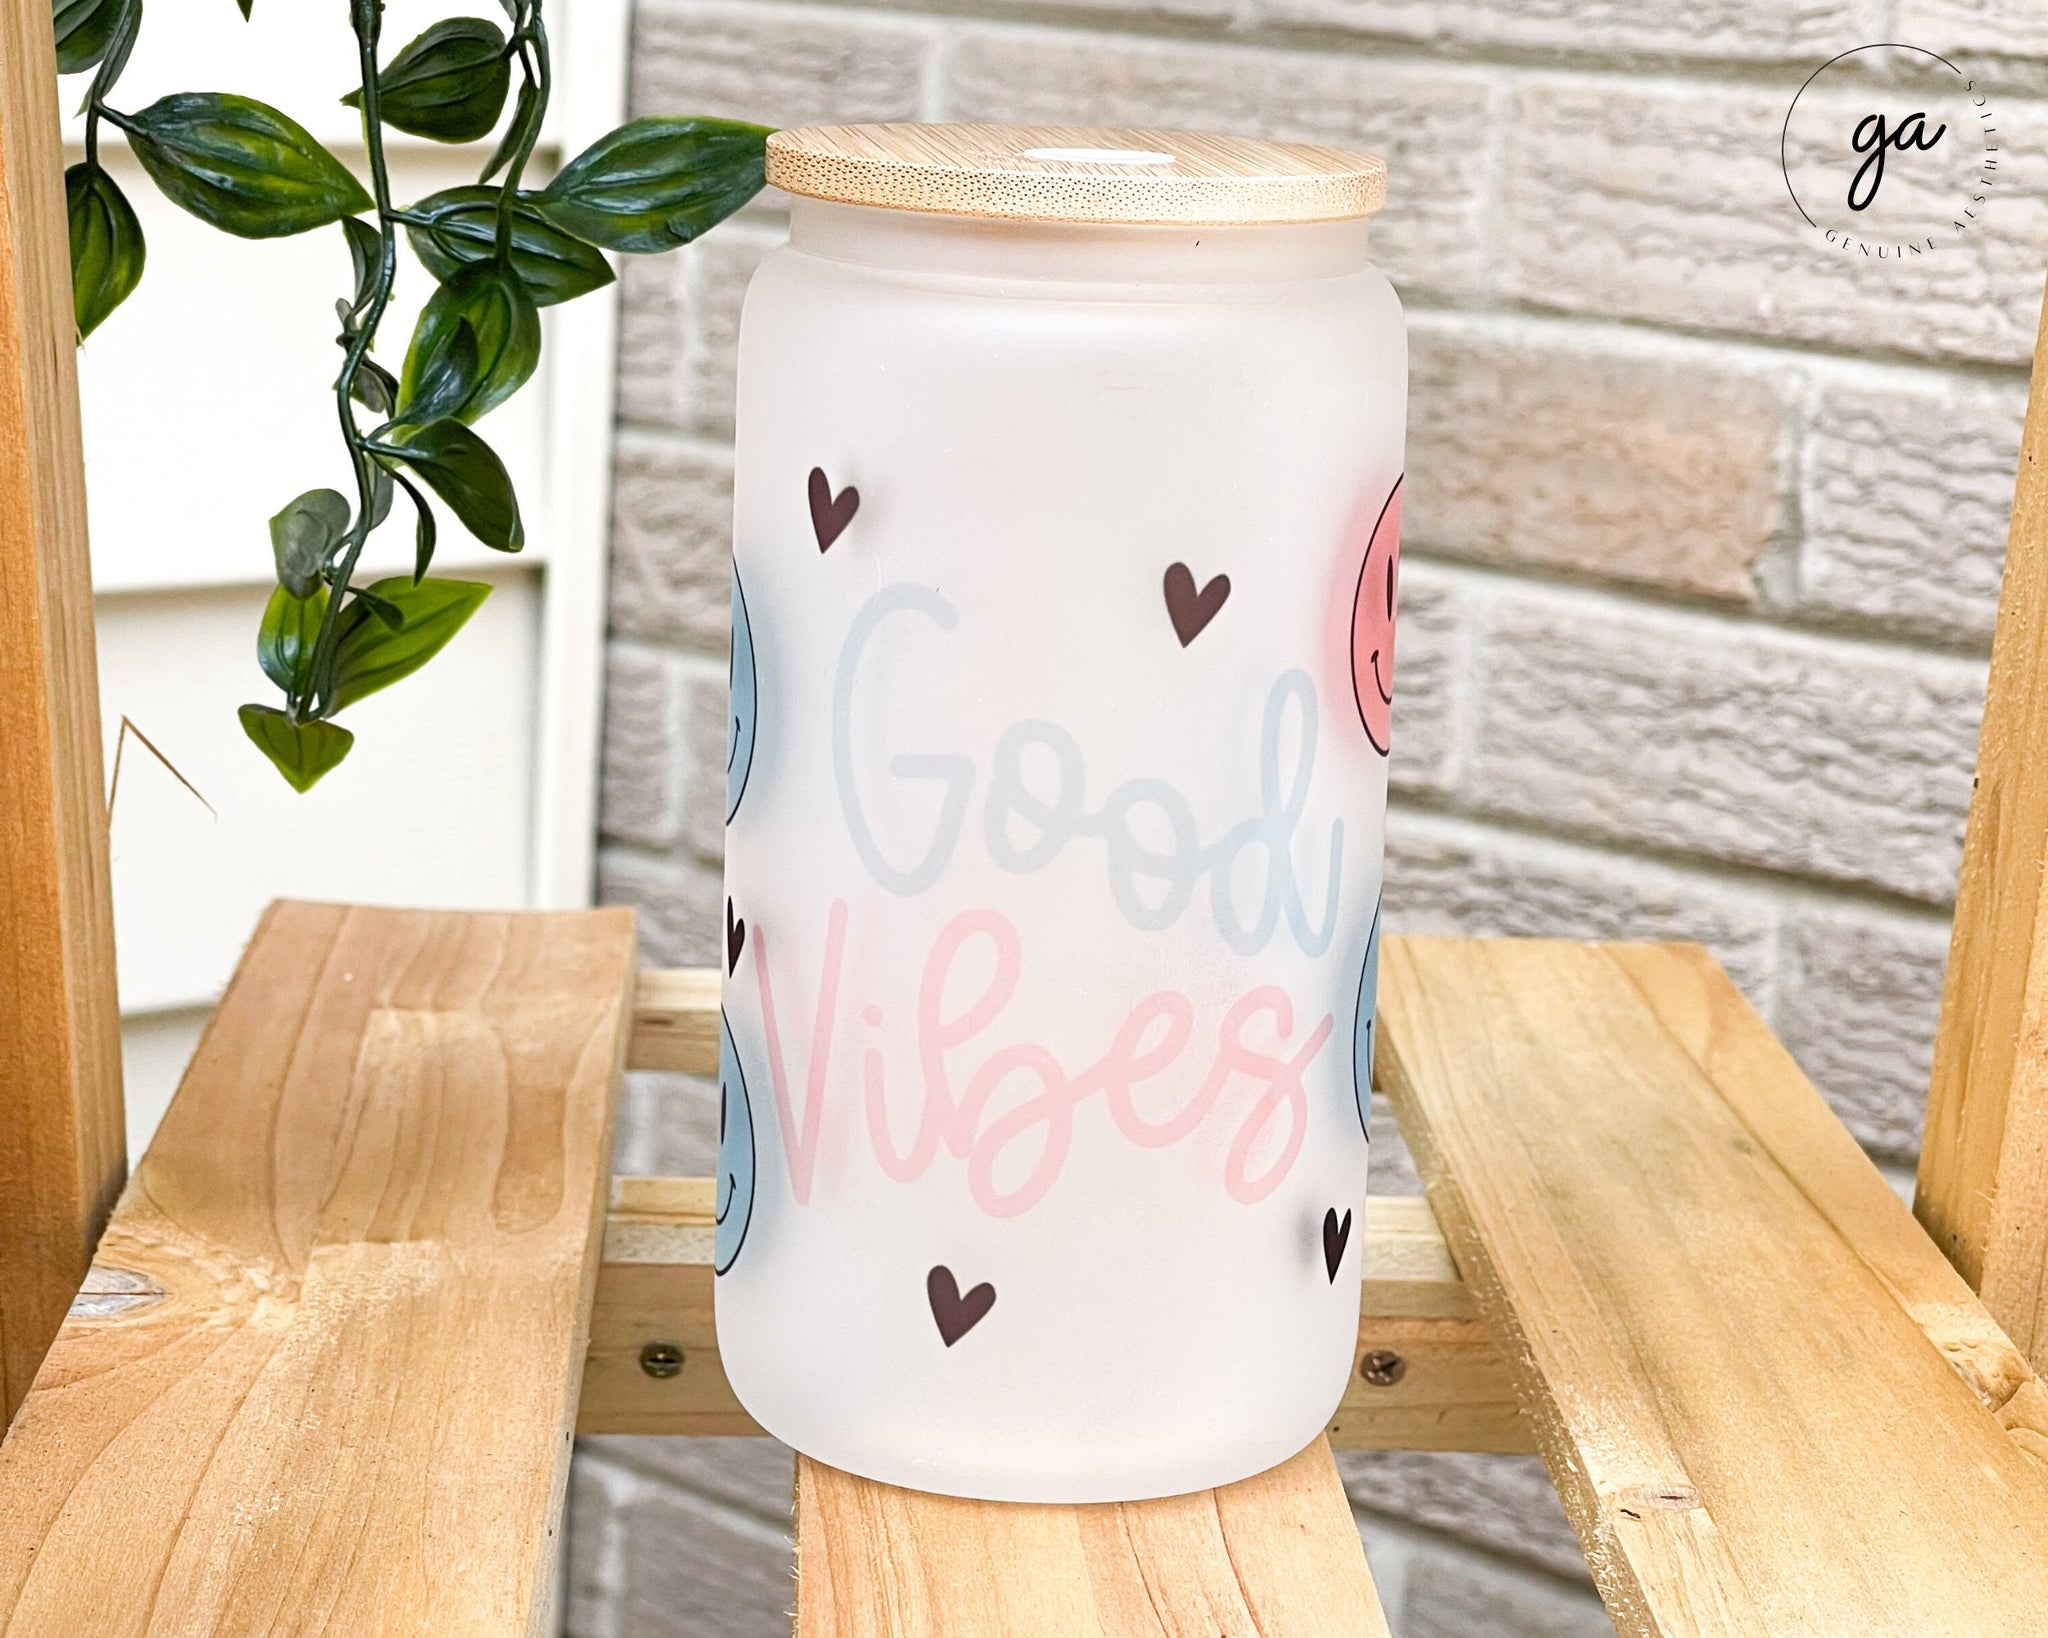 16oz Good Vibes Glass Coffee Can, Iced Coffee Glass, Smiley Libbey